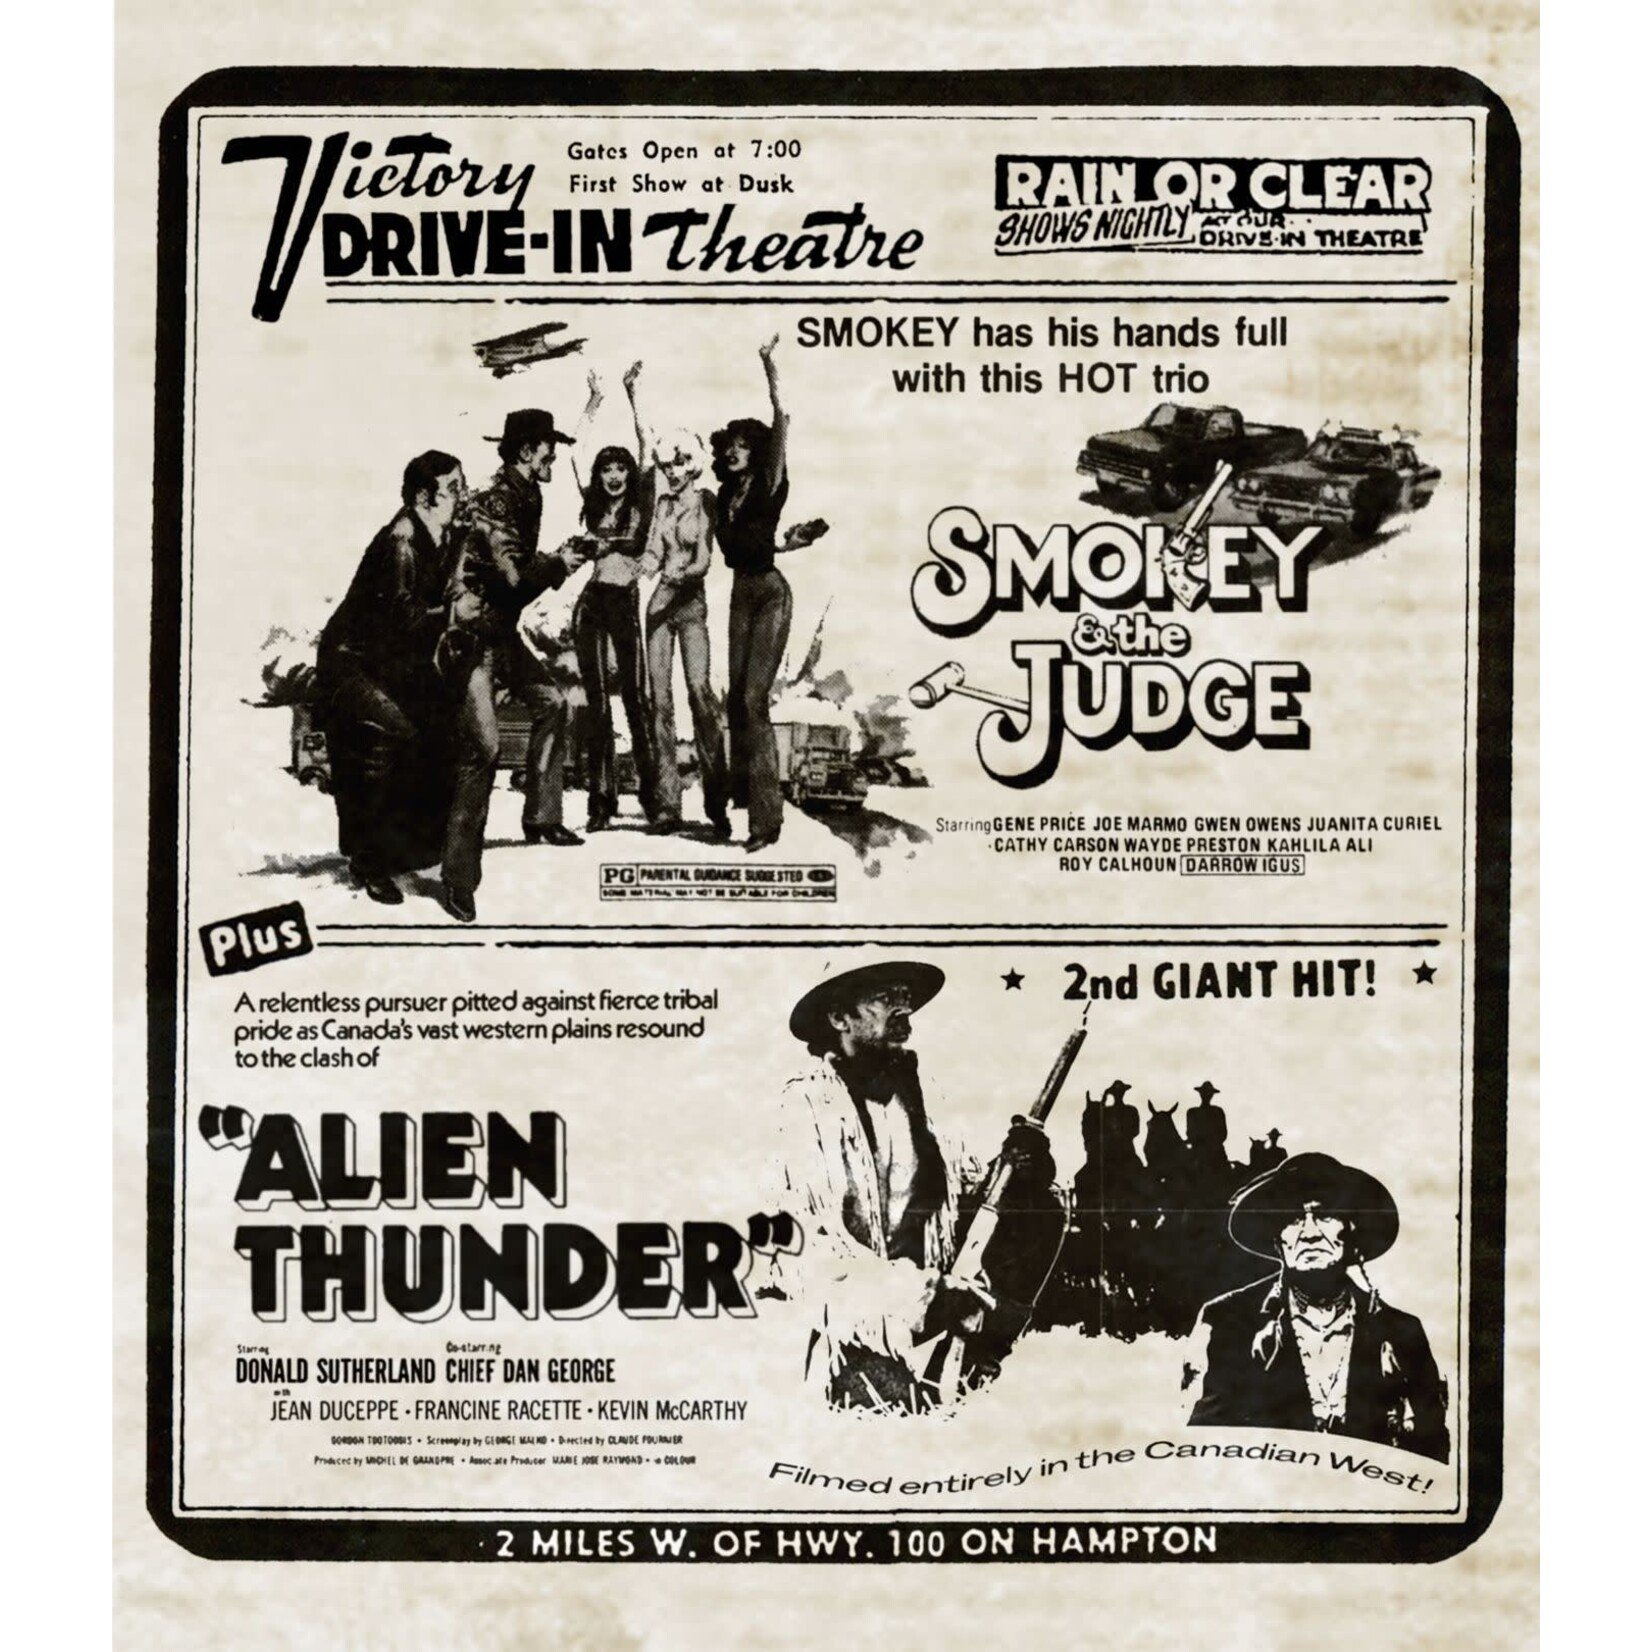 Smokey & The Judge/Alien Thunder - Drive-In Double Feature [BRD]